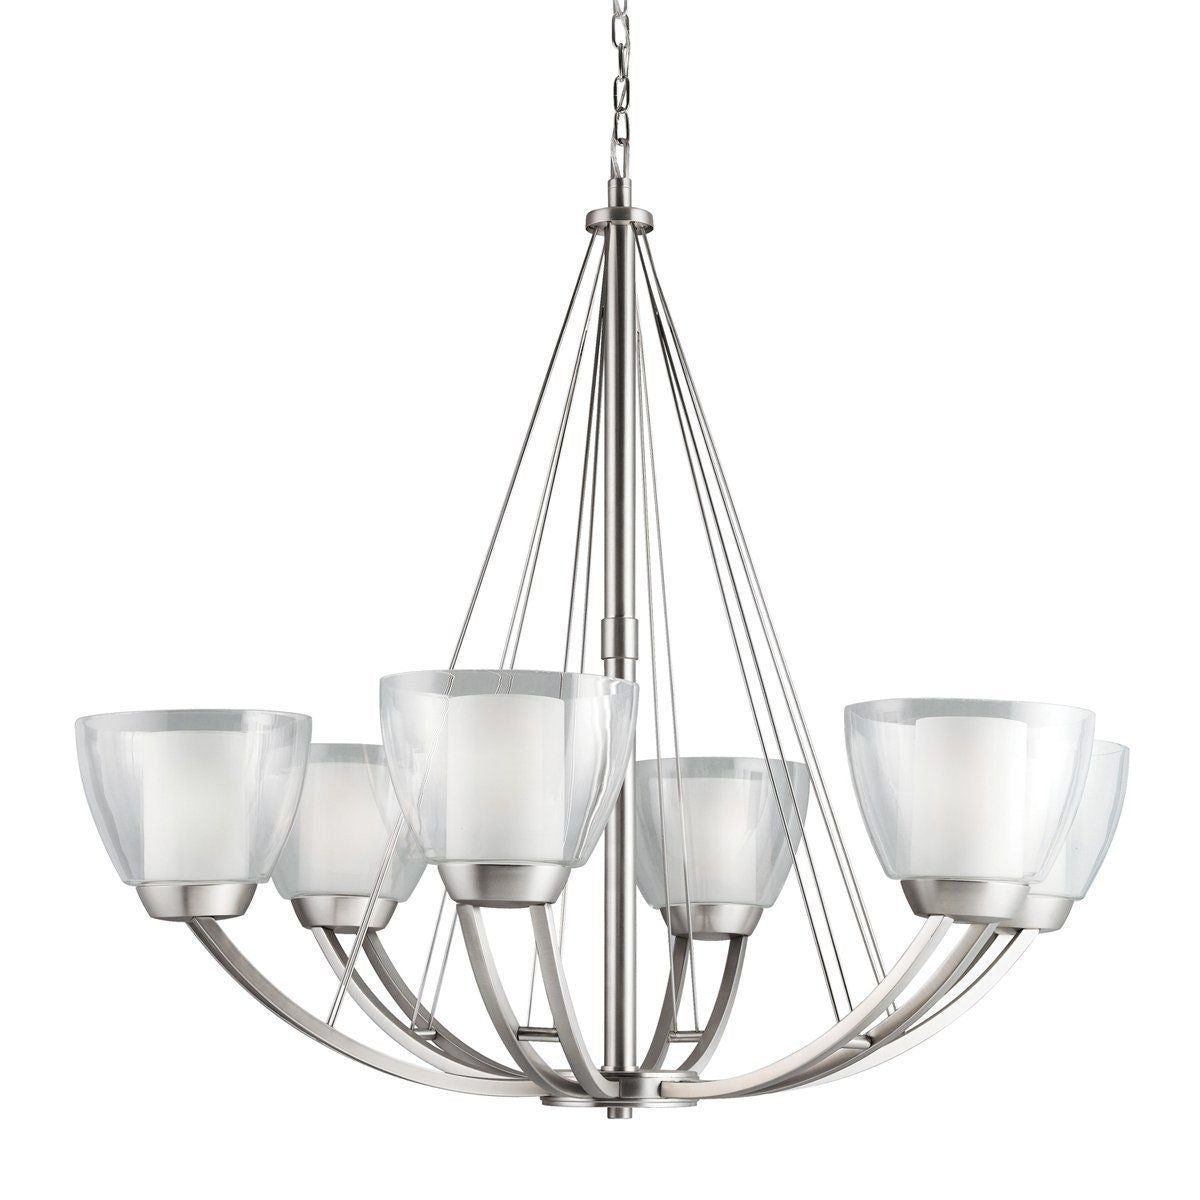 Aztec by Kichler Lighting 34930 Six Light Lucia Collection Hanging Chandelier in Brushed Nickel Finish